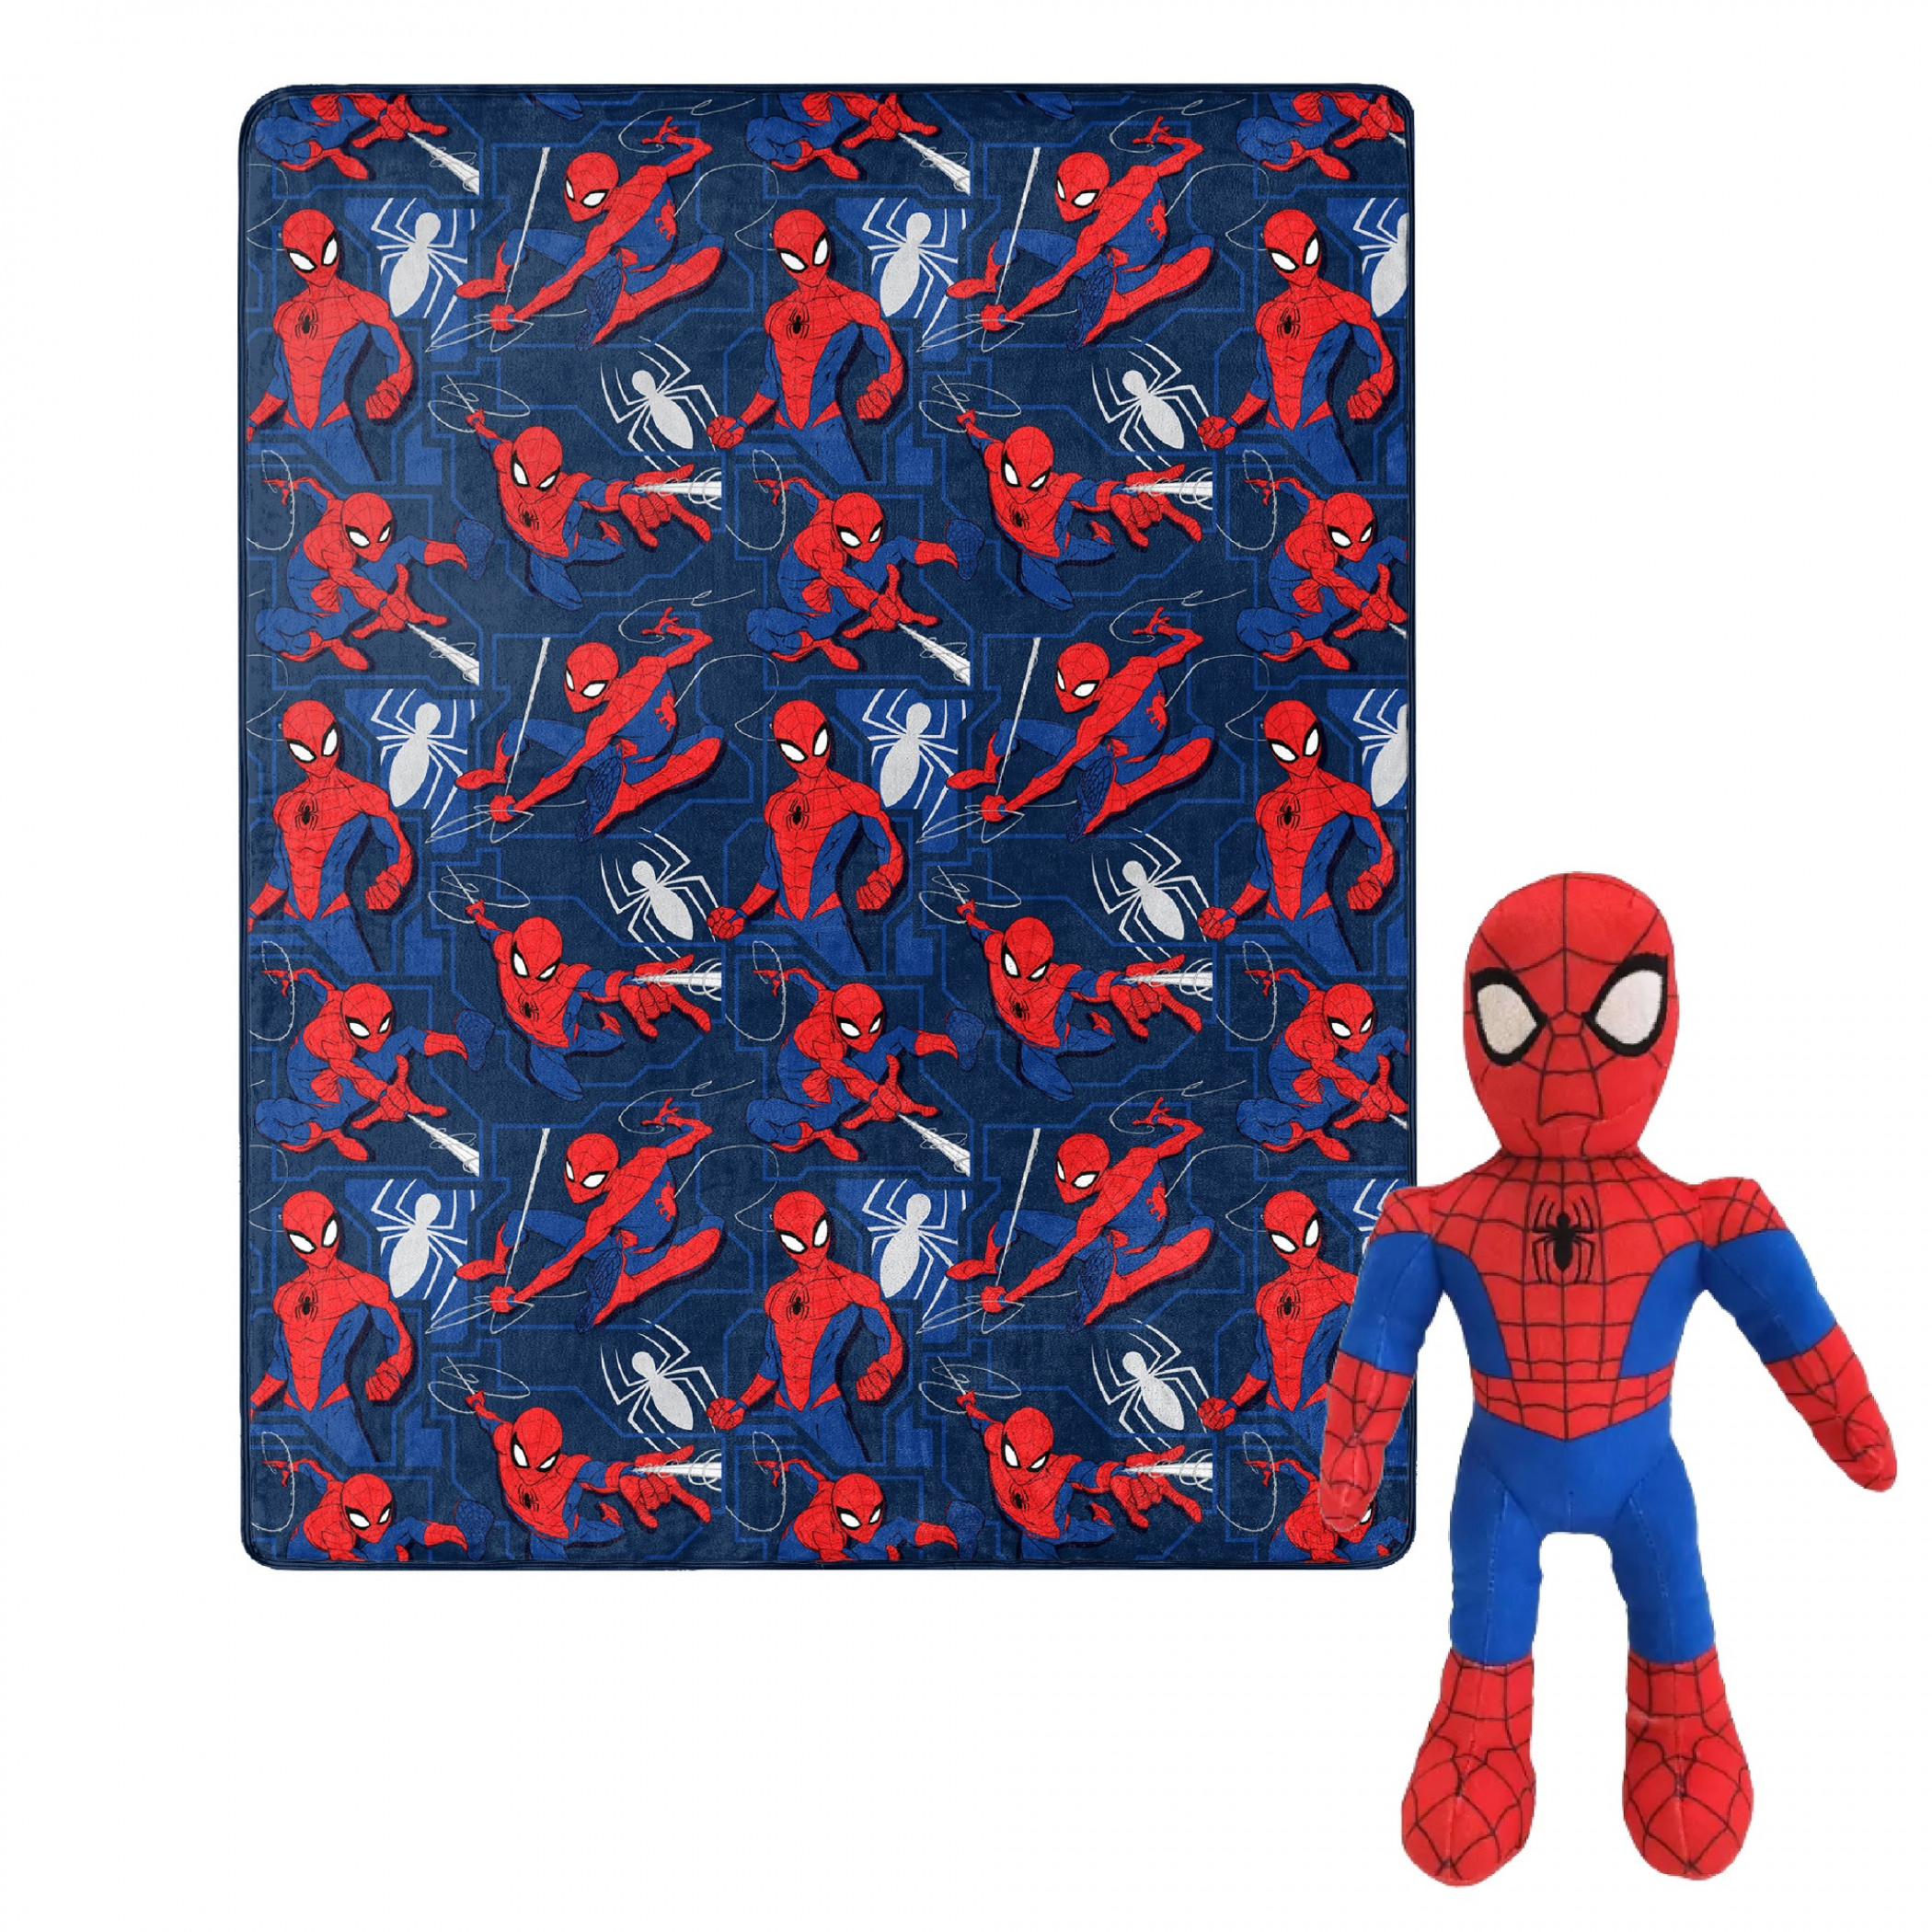 Spider-Man Character and Symbols 40 x 50 Silk Touch with Plush Hugger